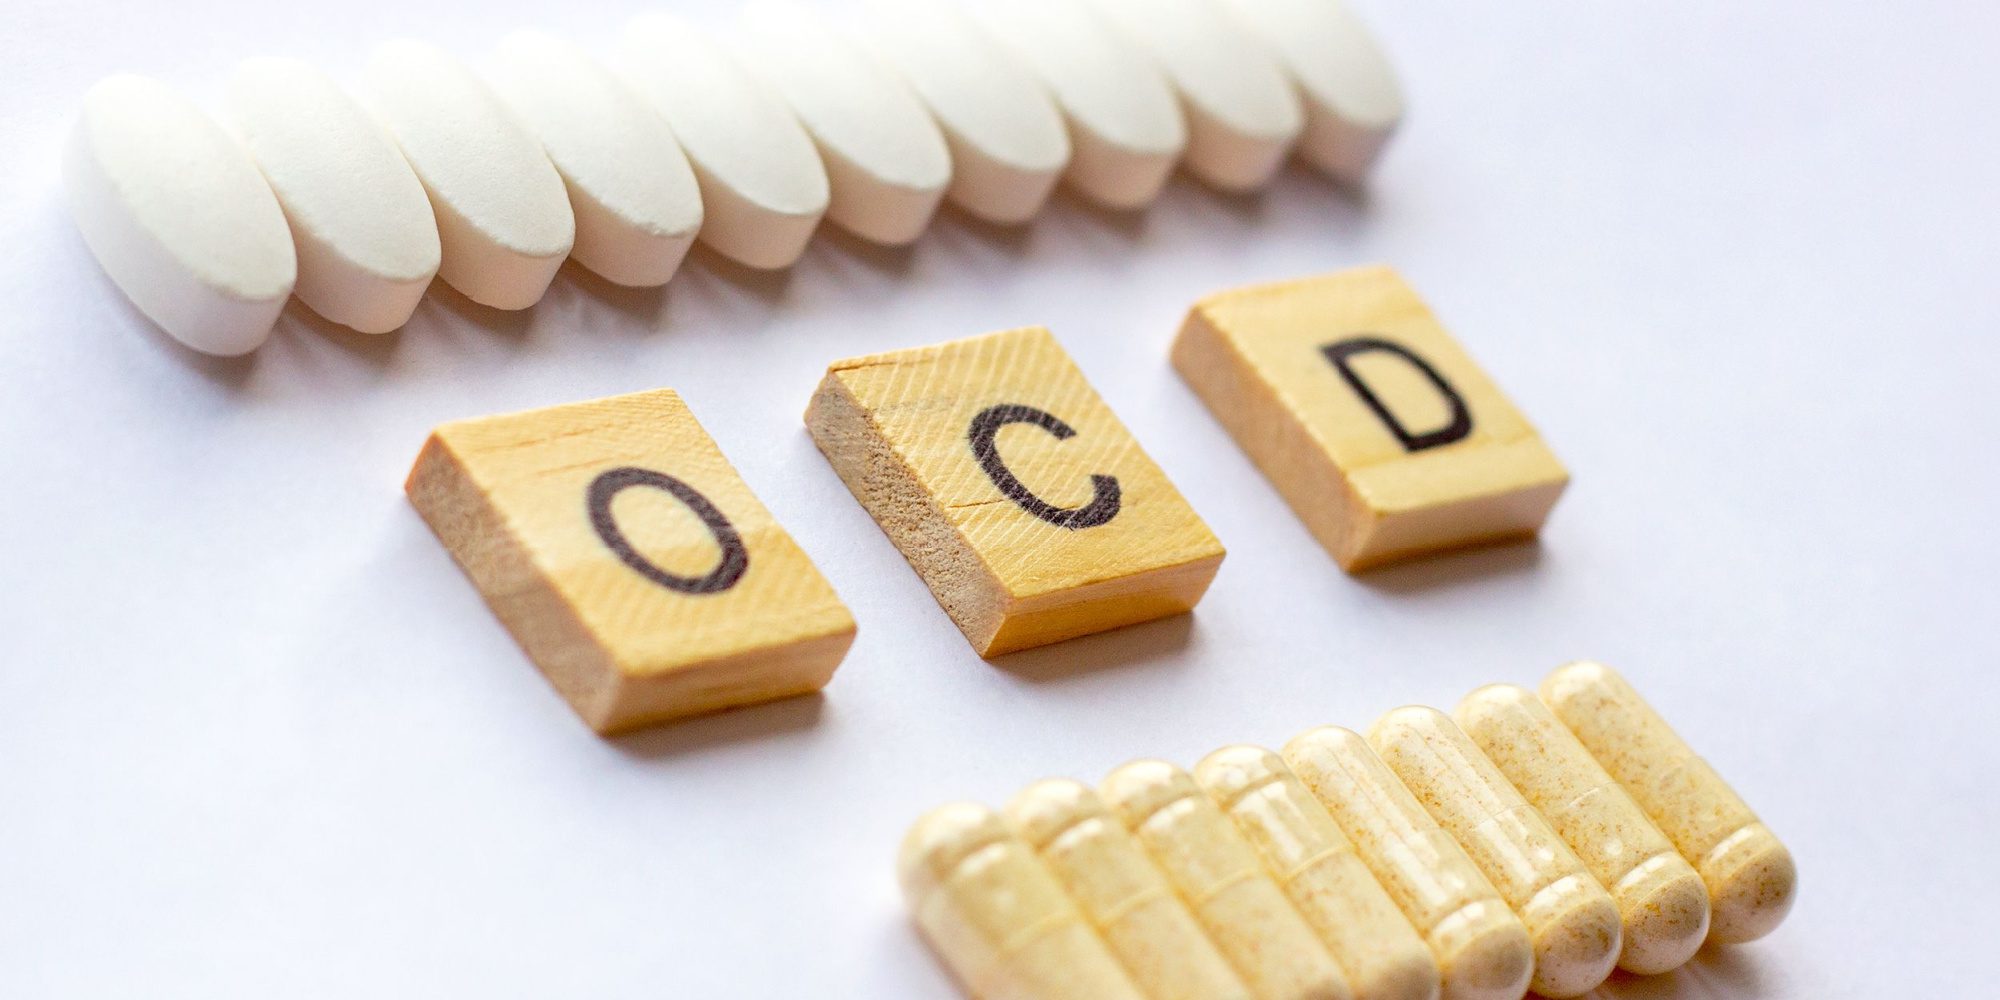 OCD Treatment Near Me: How to Find the Right Program